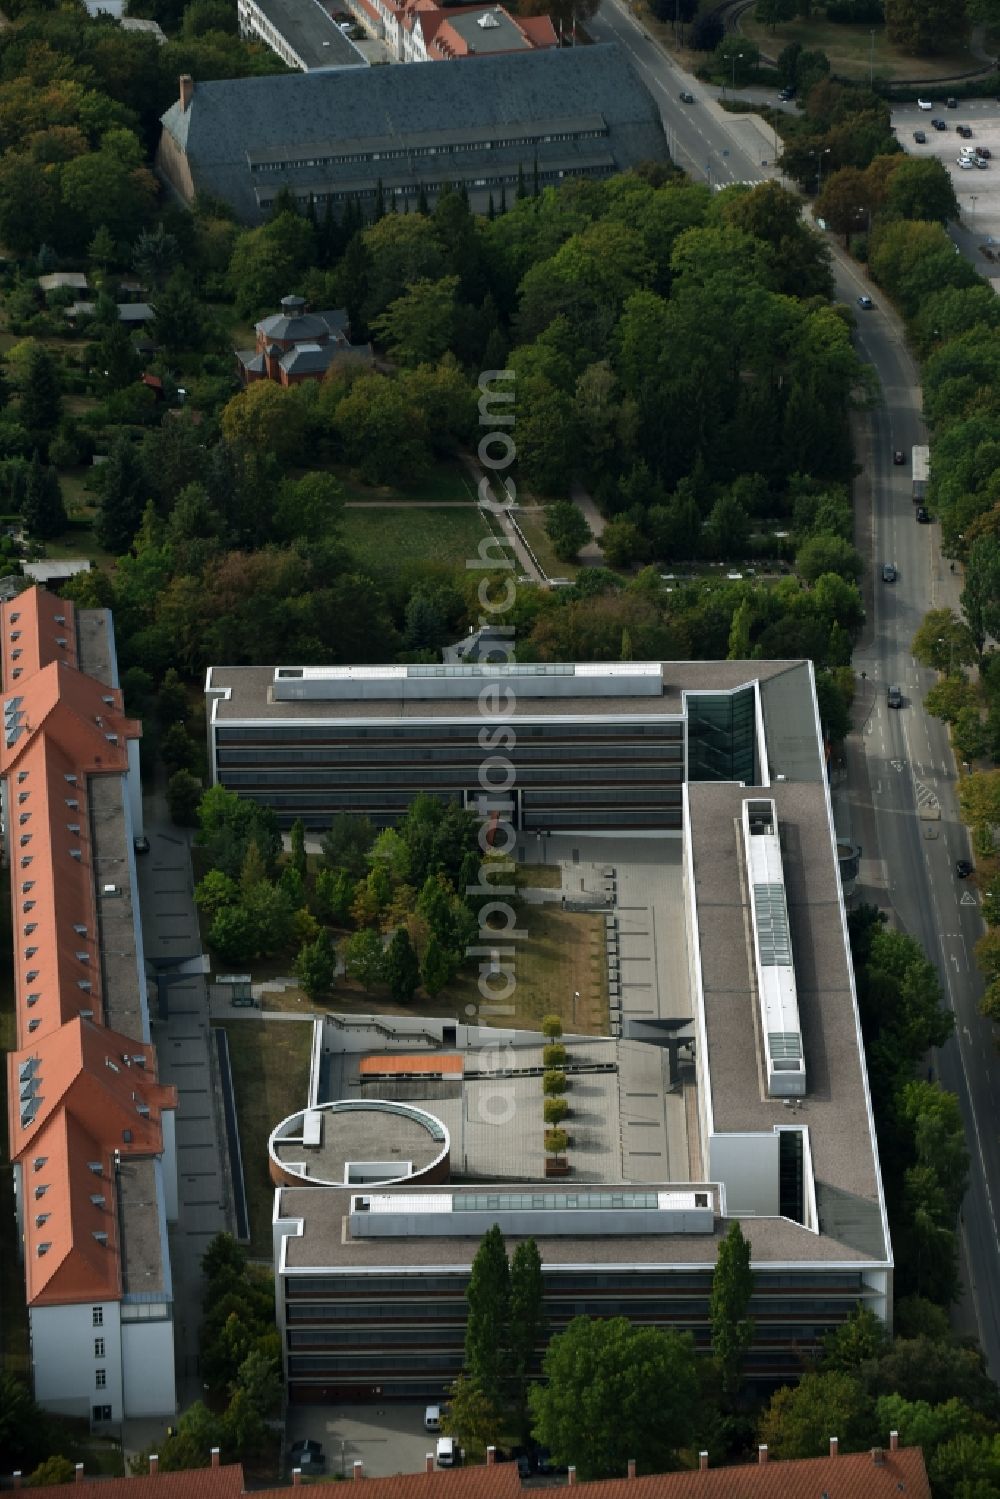 Aerial photograph Erfurt - Building Complex of the Thuringian Ministries in the Werner Seelenbinder street in Erfurt in Thuringia. The buildings include the ministeries for justice, migration, social issues and education